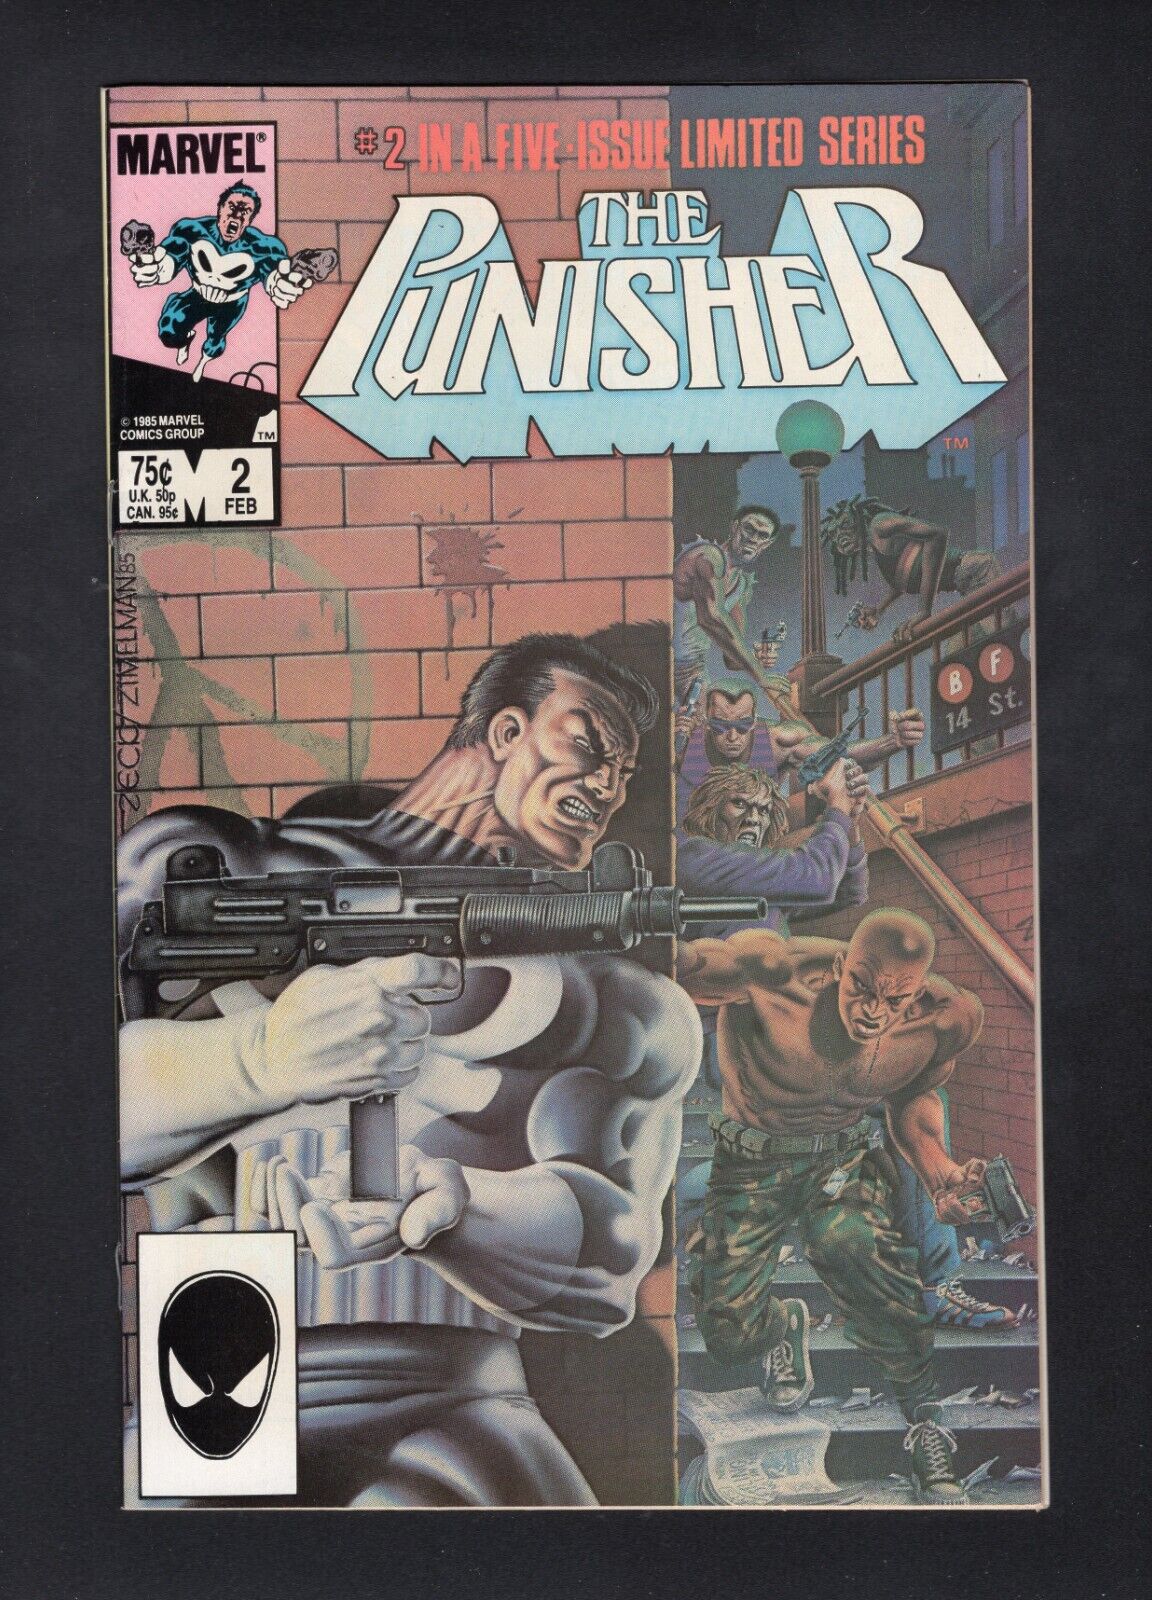 Punisher Limited Series #2 Vol. 1 Direct Marvel Comics \'86 VF/NM